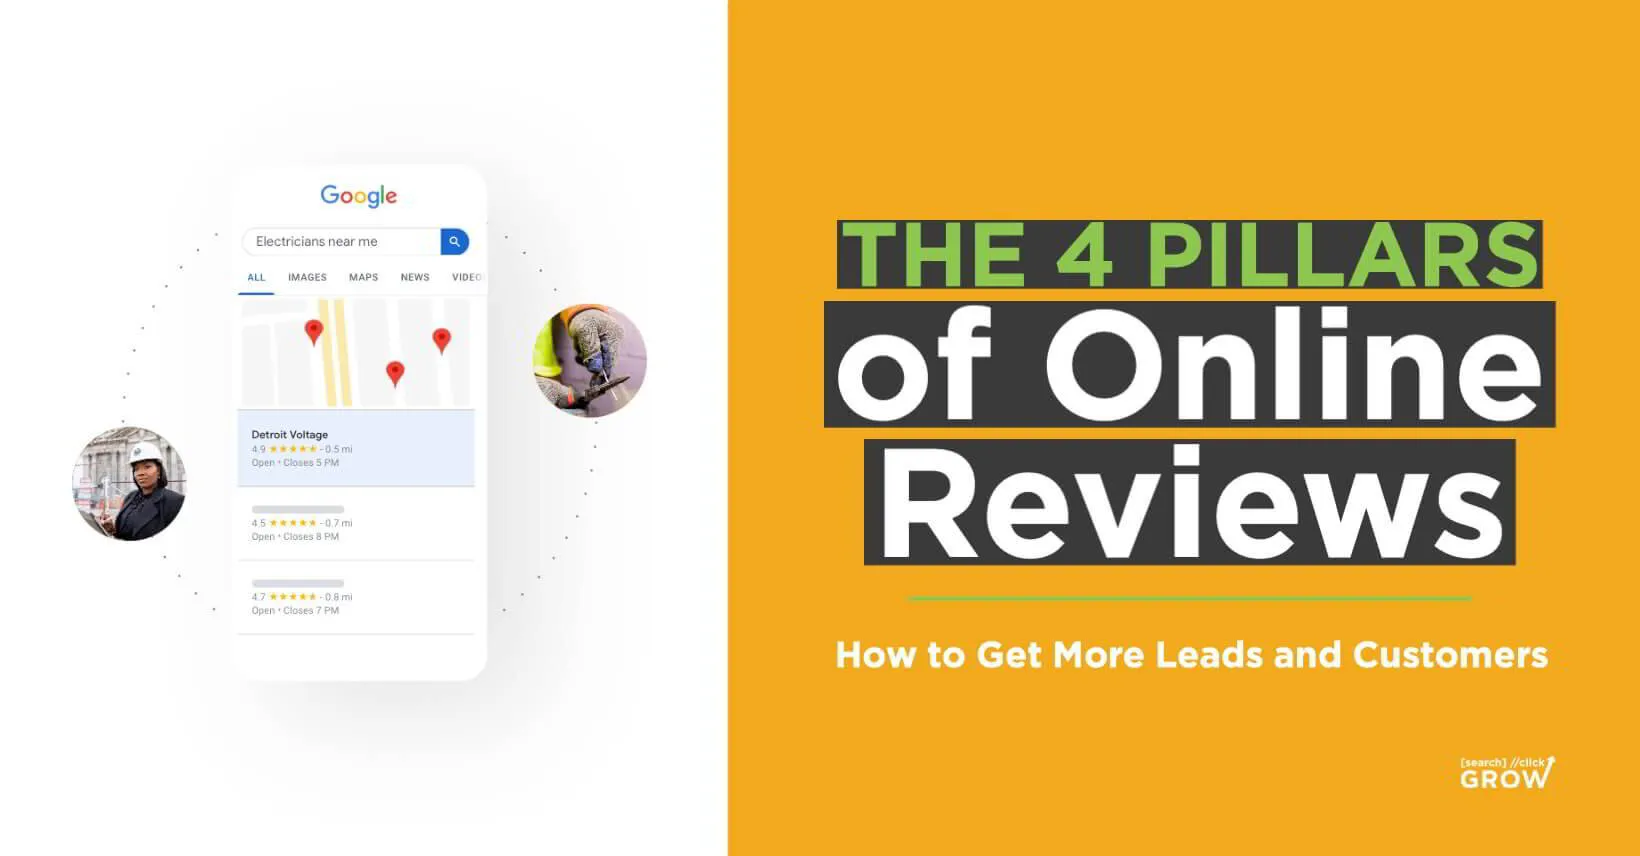 The 4 Pillars of Online Reviews: How to Get More Leads and Customers